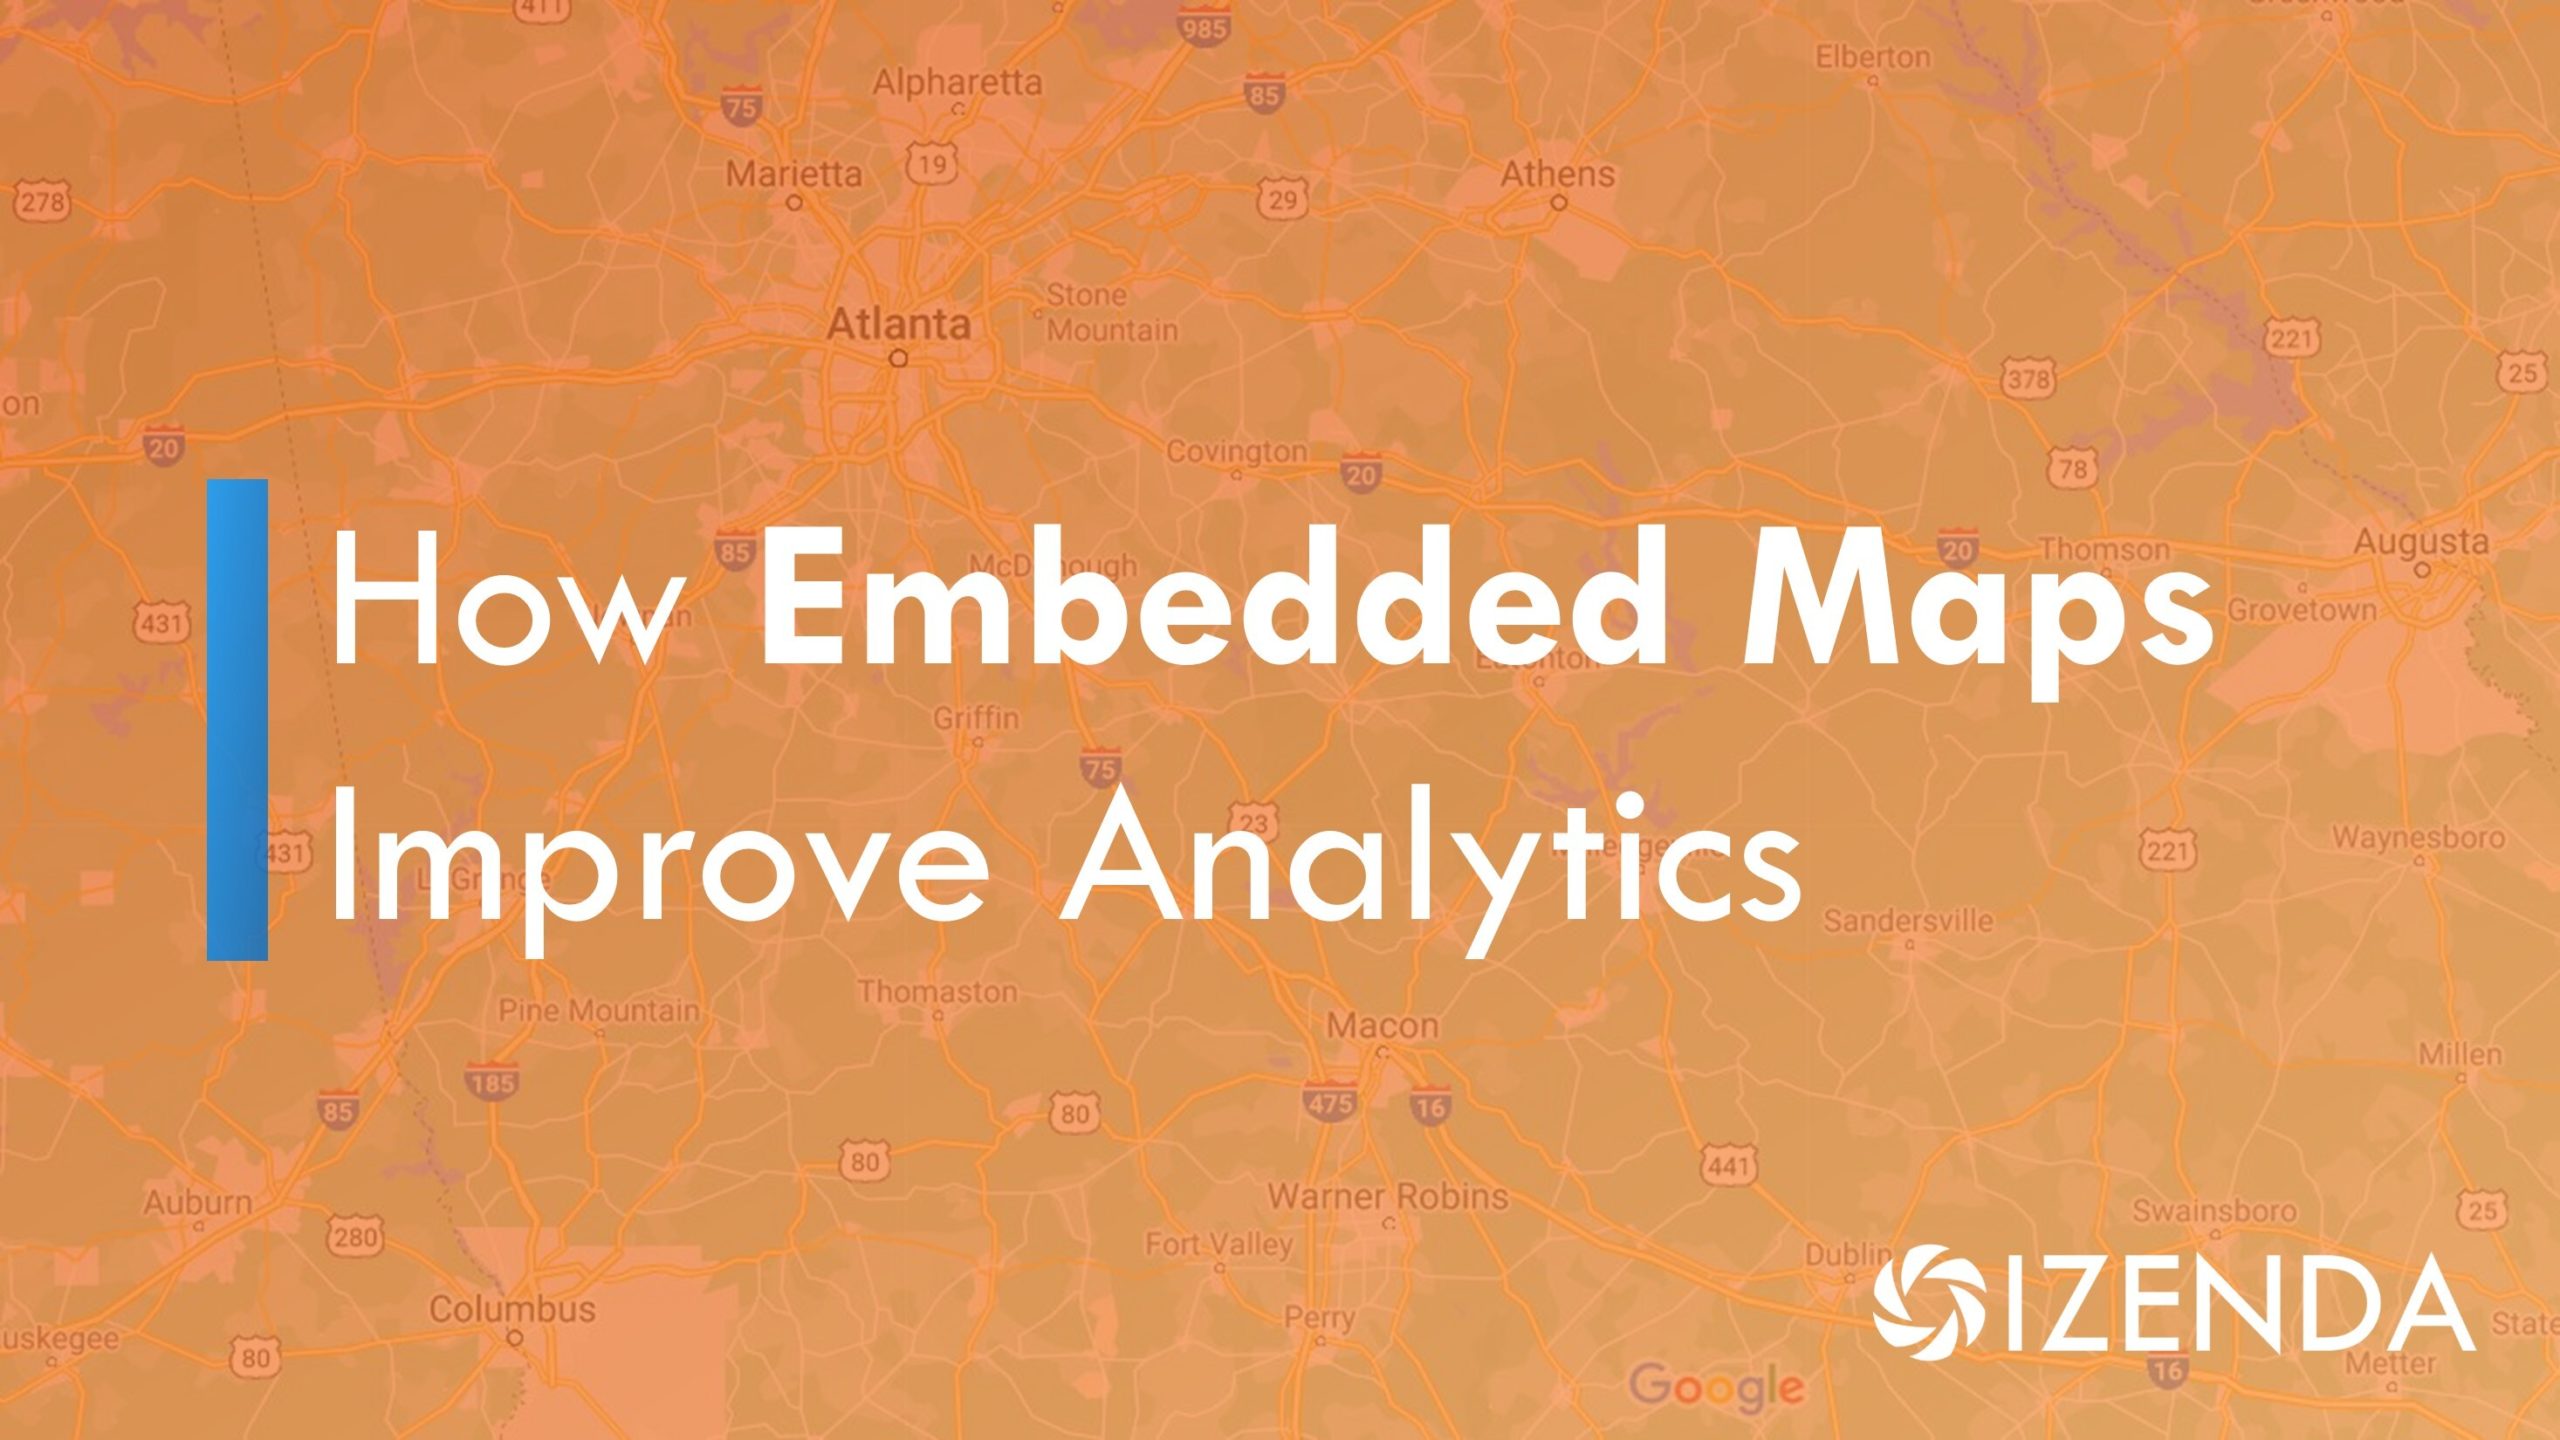 embedded maps can improve the analytics experience